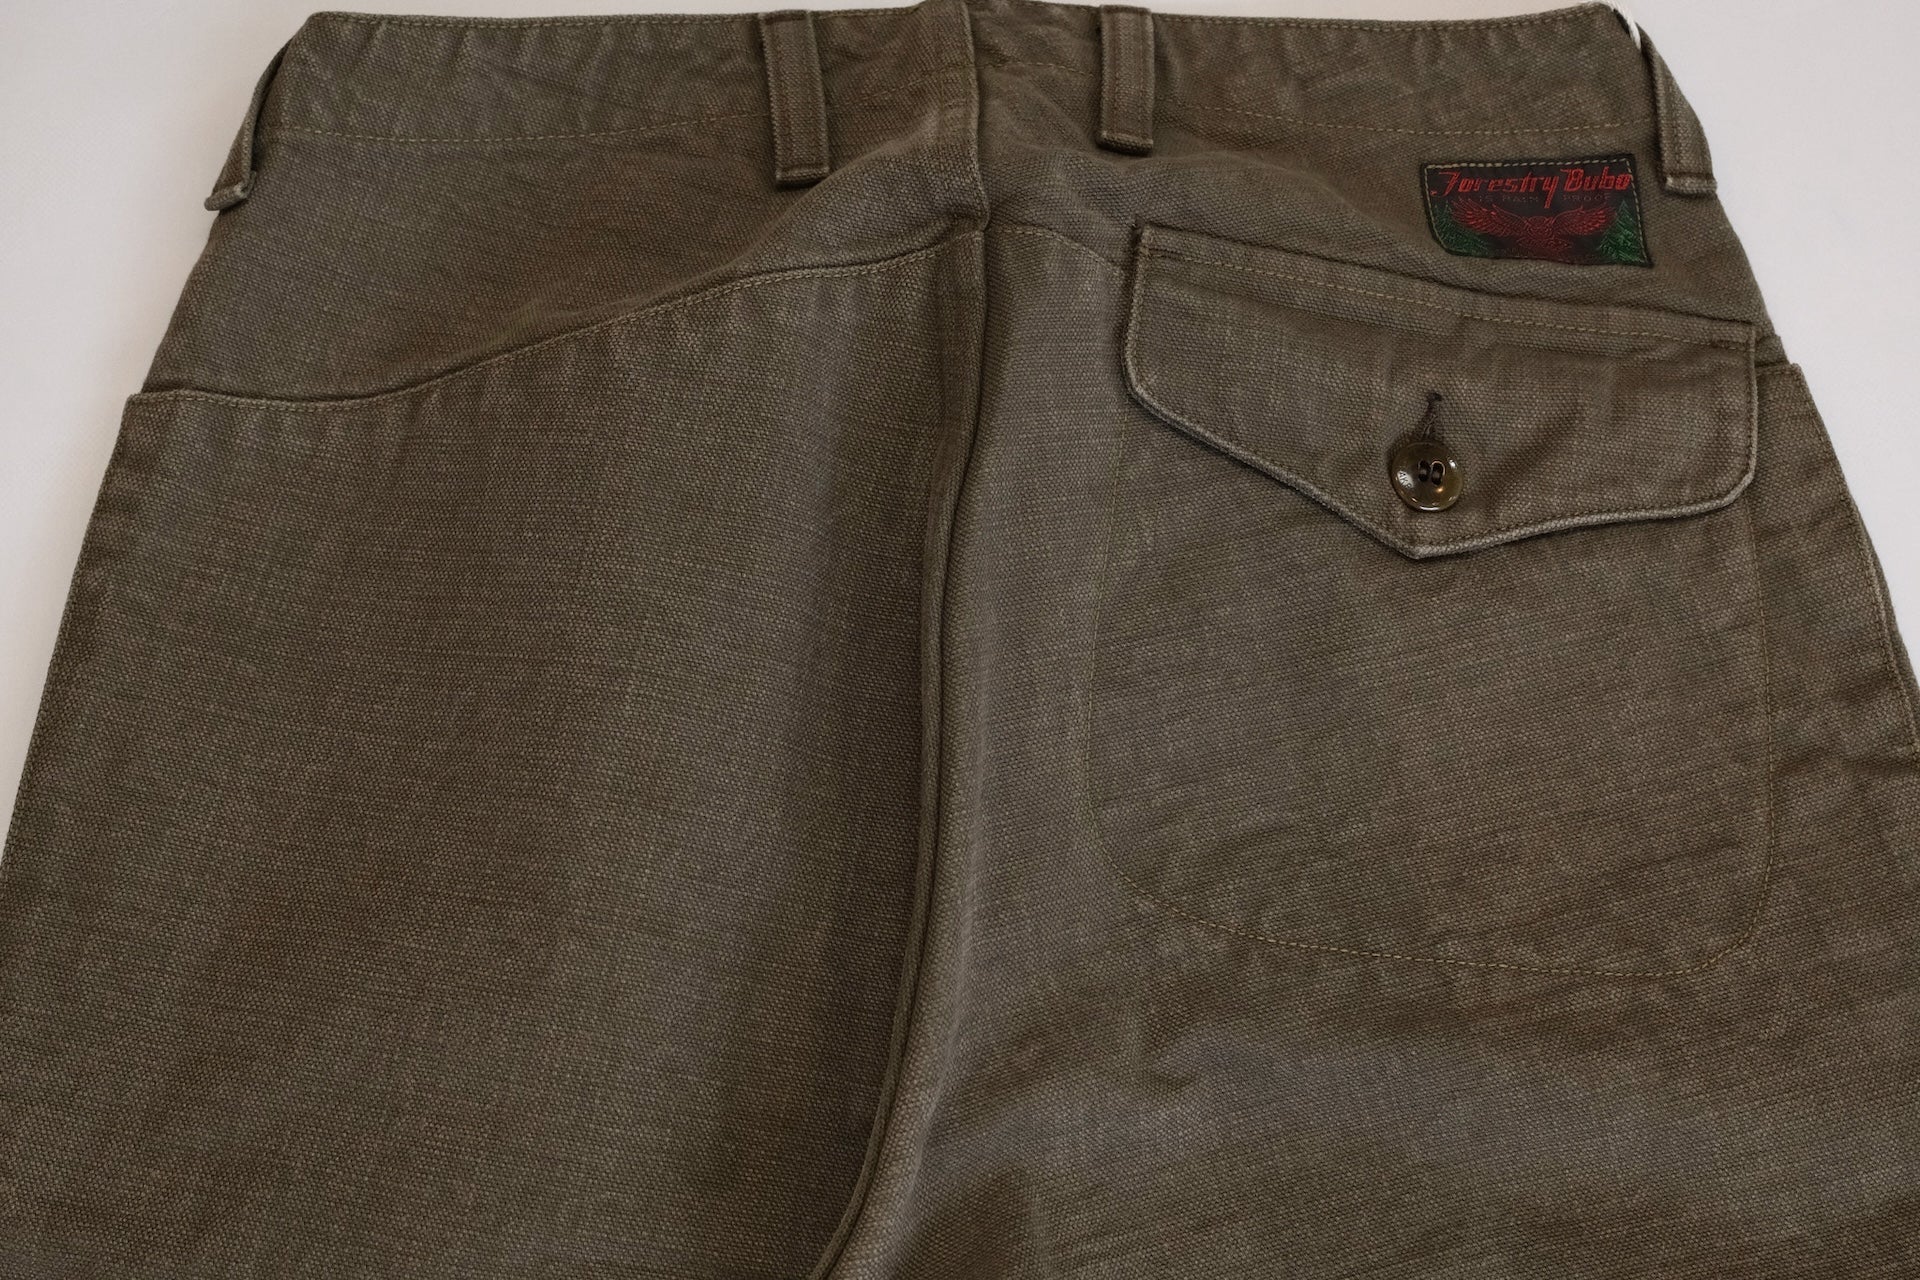 Freewheelers "Bear Tooth" Heavyweight Duck Canvas Trousers (Olive)